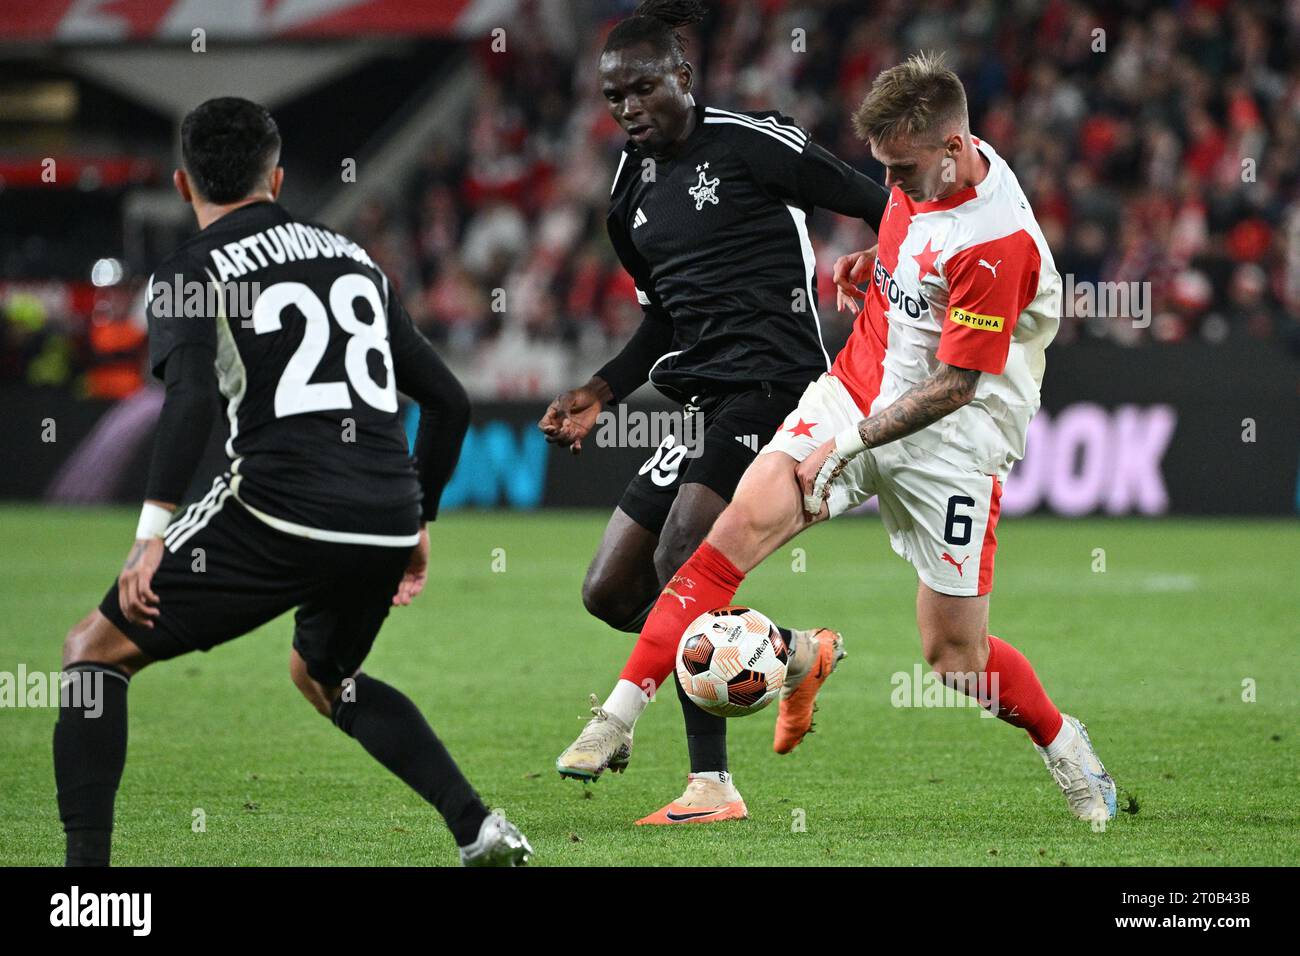 Prague, Czech Republic. 05th Oct, 2023. Soccer players L-R Armel Zohouri of  Tiraspol and Andres Dumitrescu of Slavia Praha in action during the  Football Europe League 2nd round match, group G match